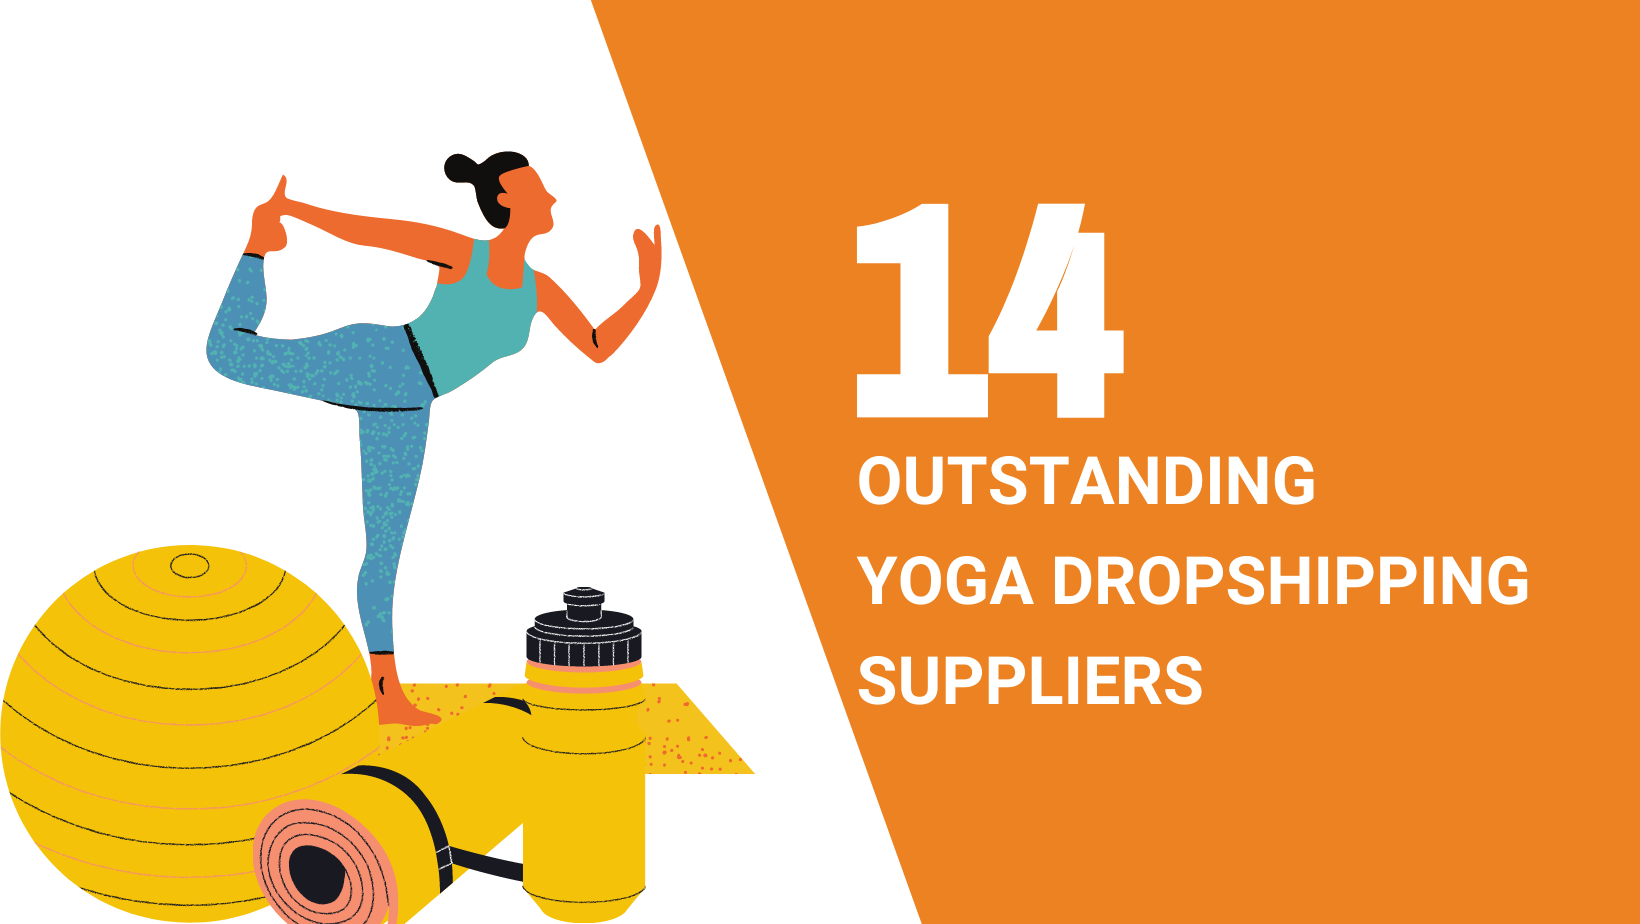 14 OUTSTANDING YOGA DROPSHIPPING SUPPLIERS